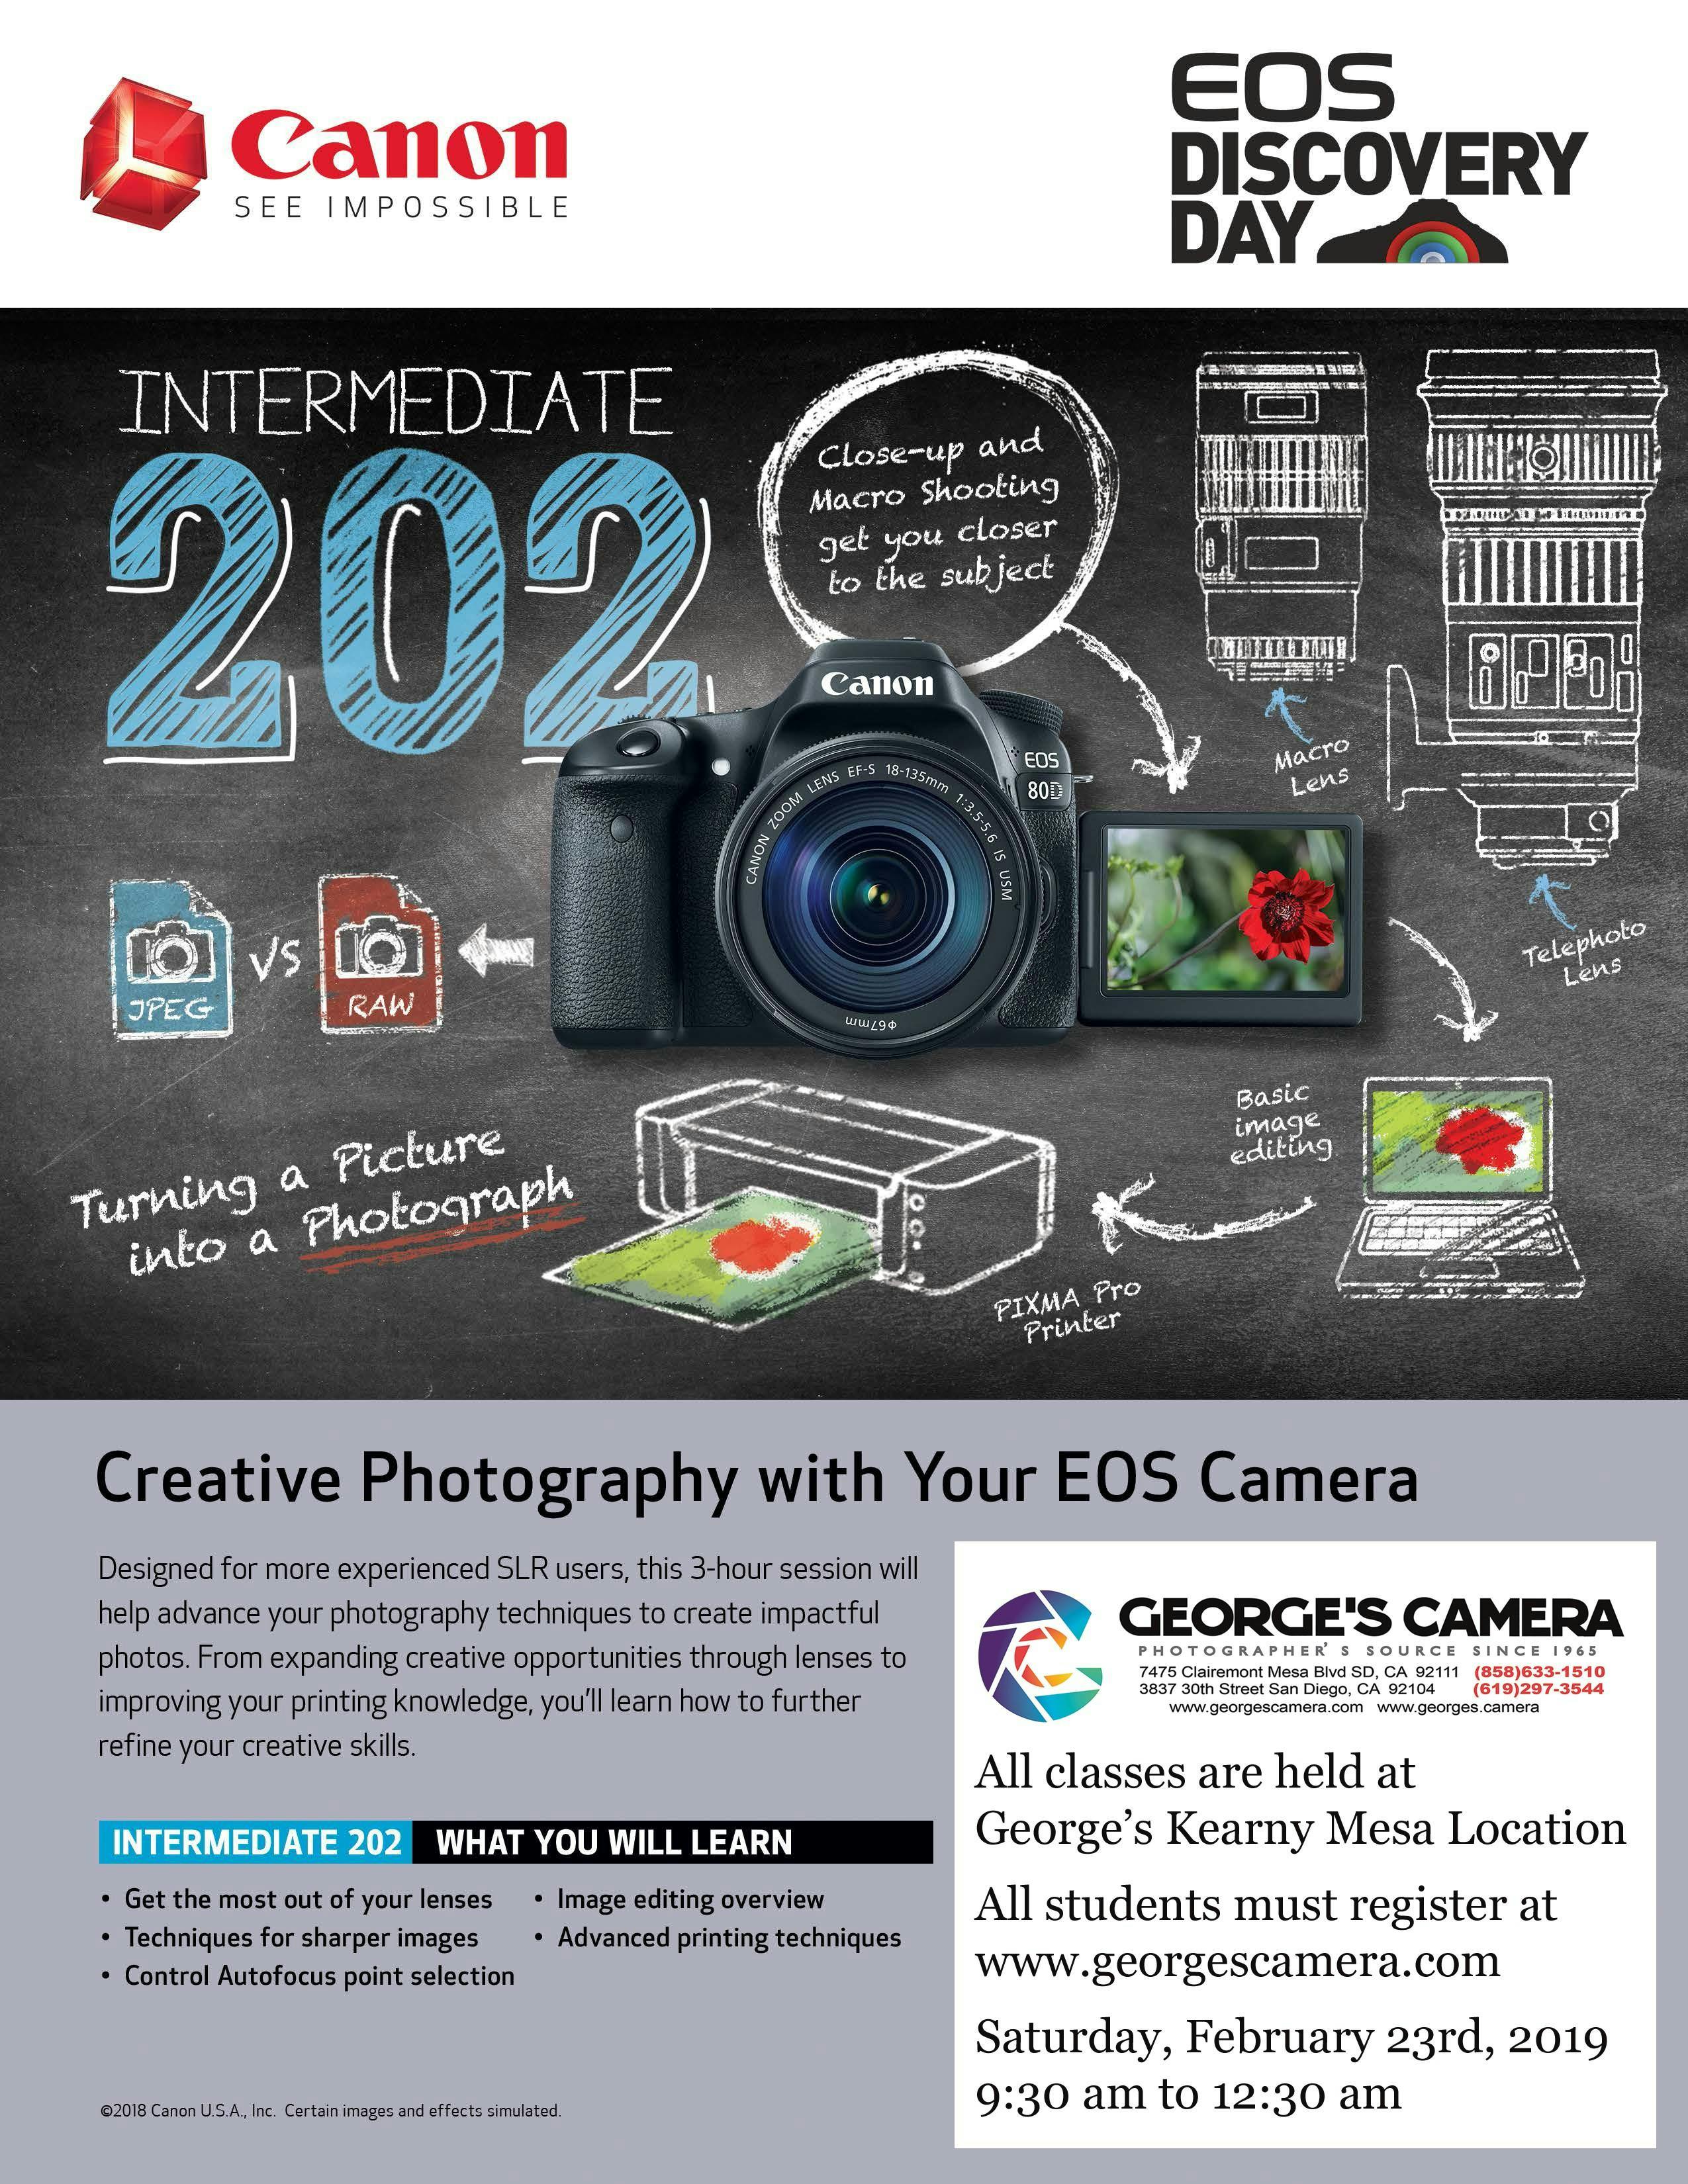 EOS Discovery Day Intermediate 202: Creative Photography with your EOS Camera